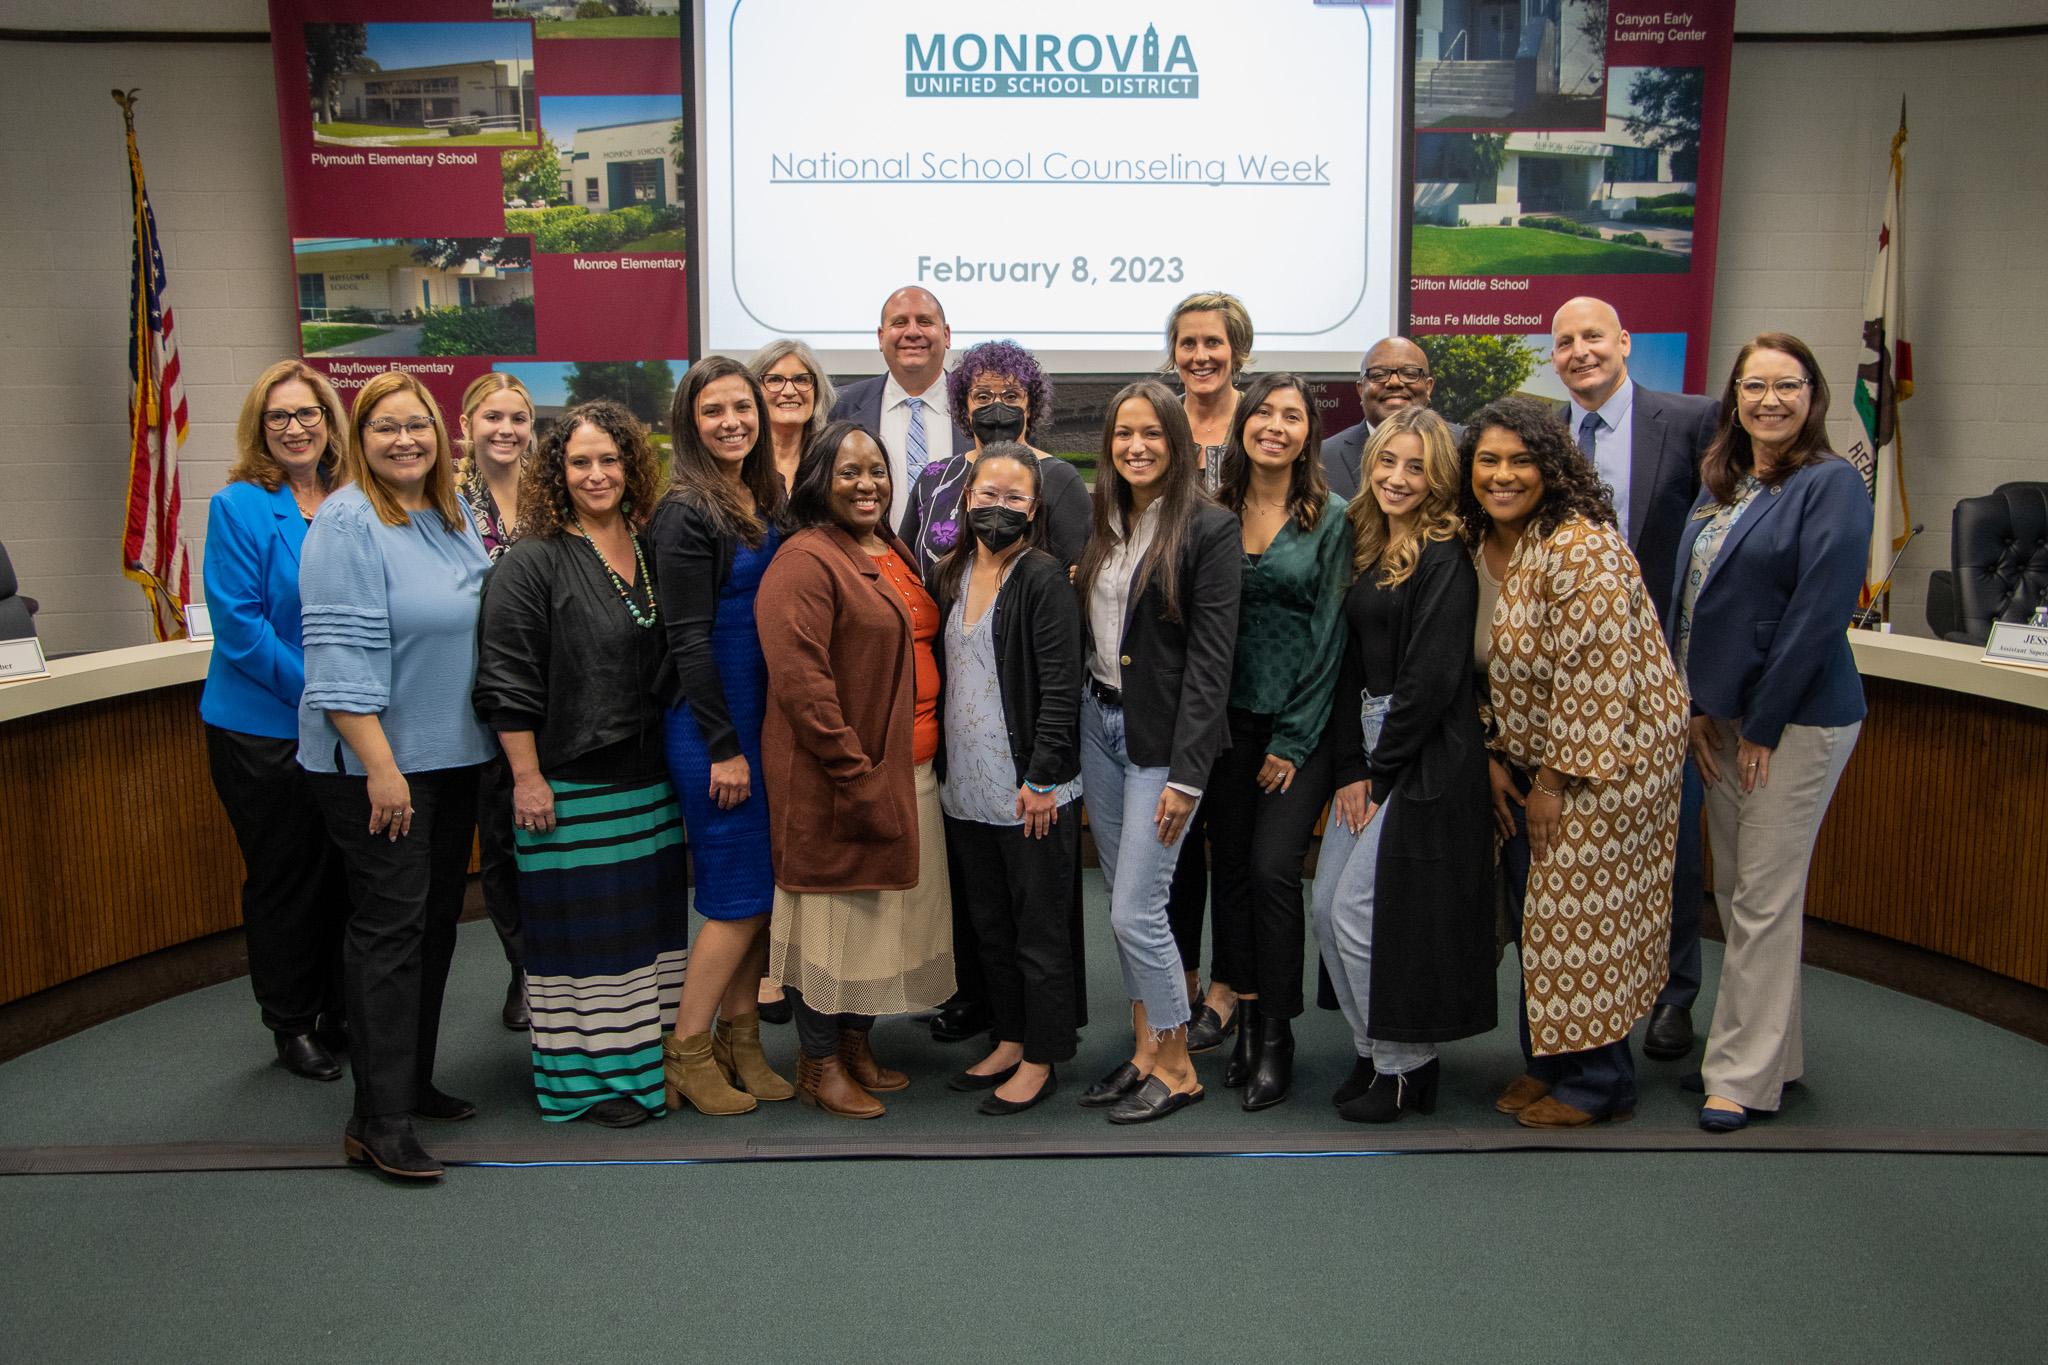 The Board highlighted Monrovia’s outstanding counselors at each of our school sites for National School Counseling Week.